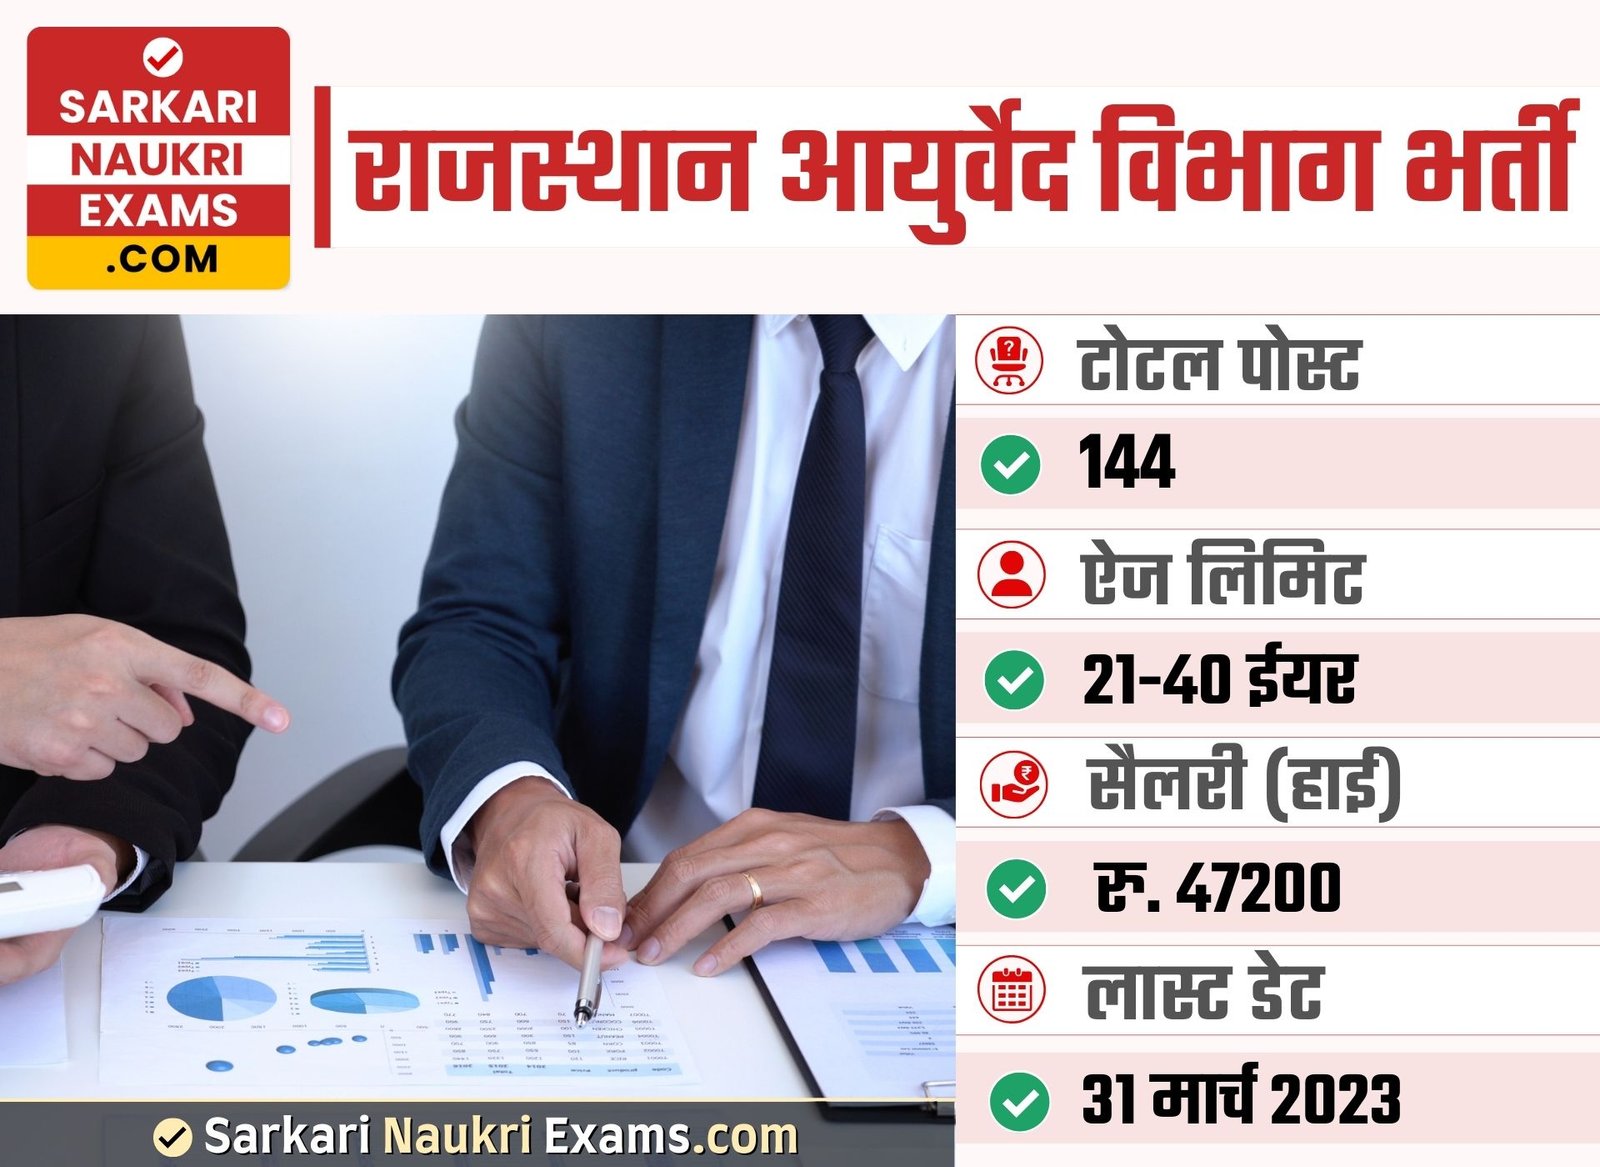 Rajasthan Ayurveda Vibhag Consultant Recruitment 2023 | Last Date 31 March 2023 Apply Online